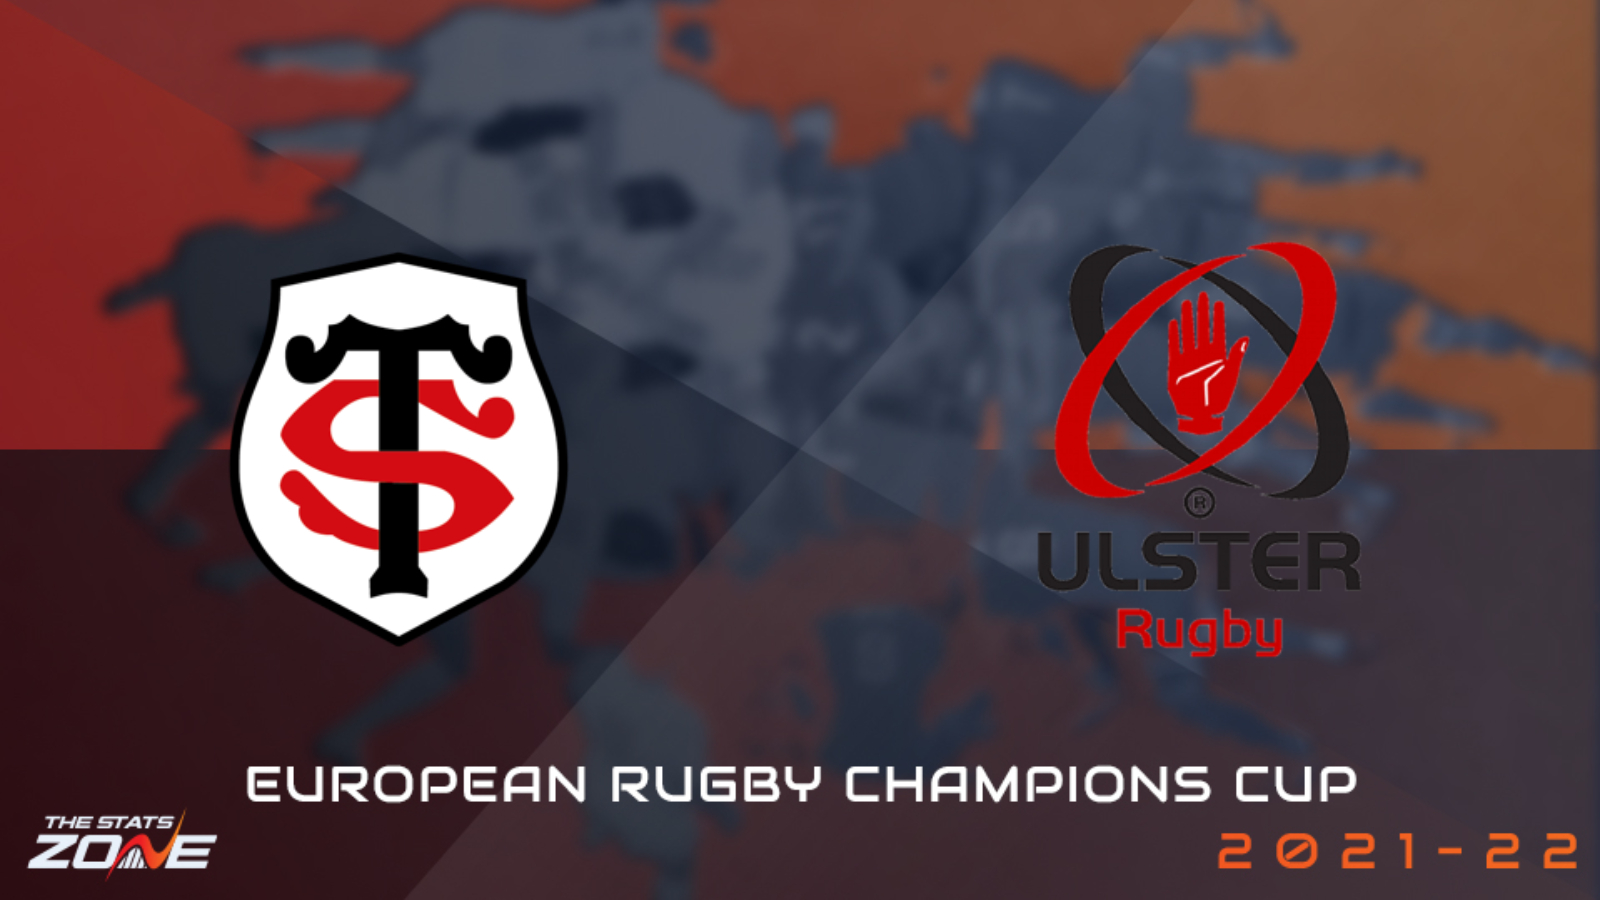 Toulouse vs Ulster Preview and Prediction